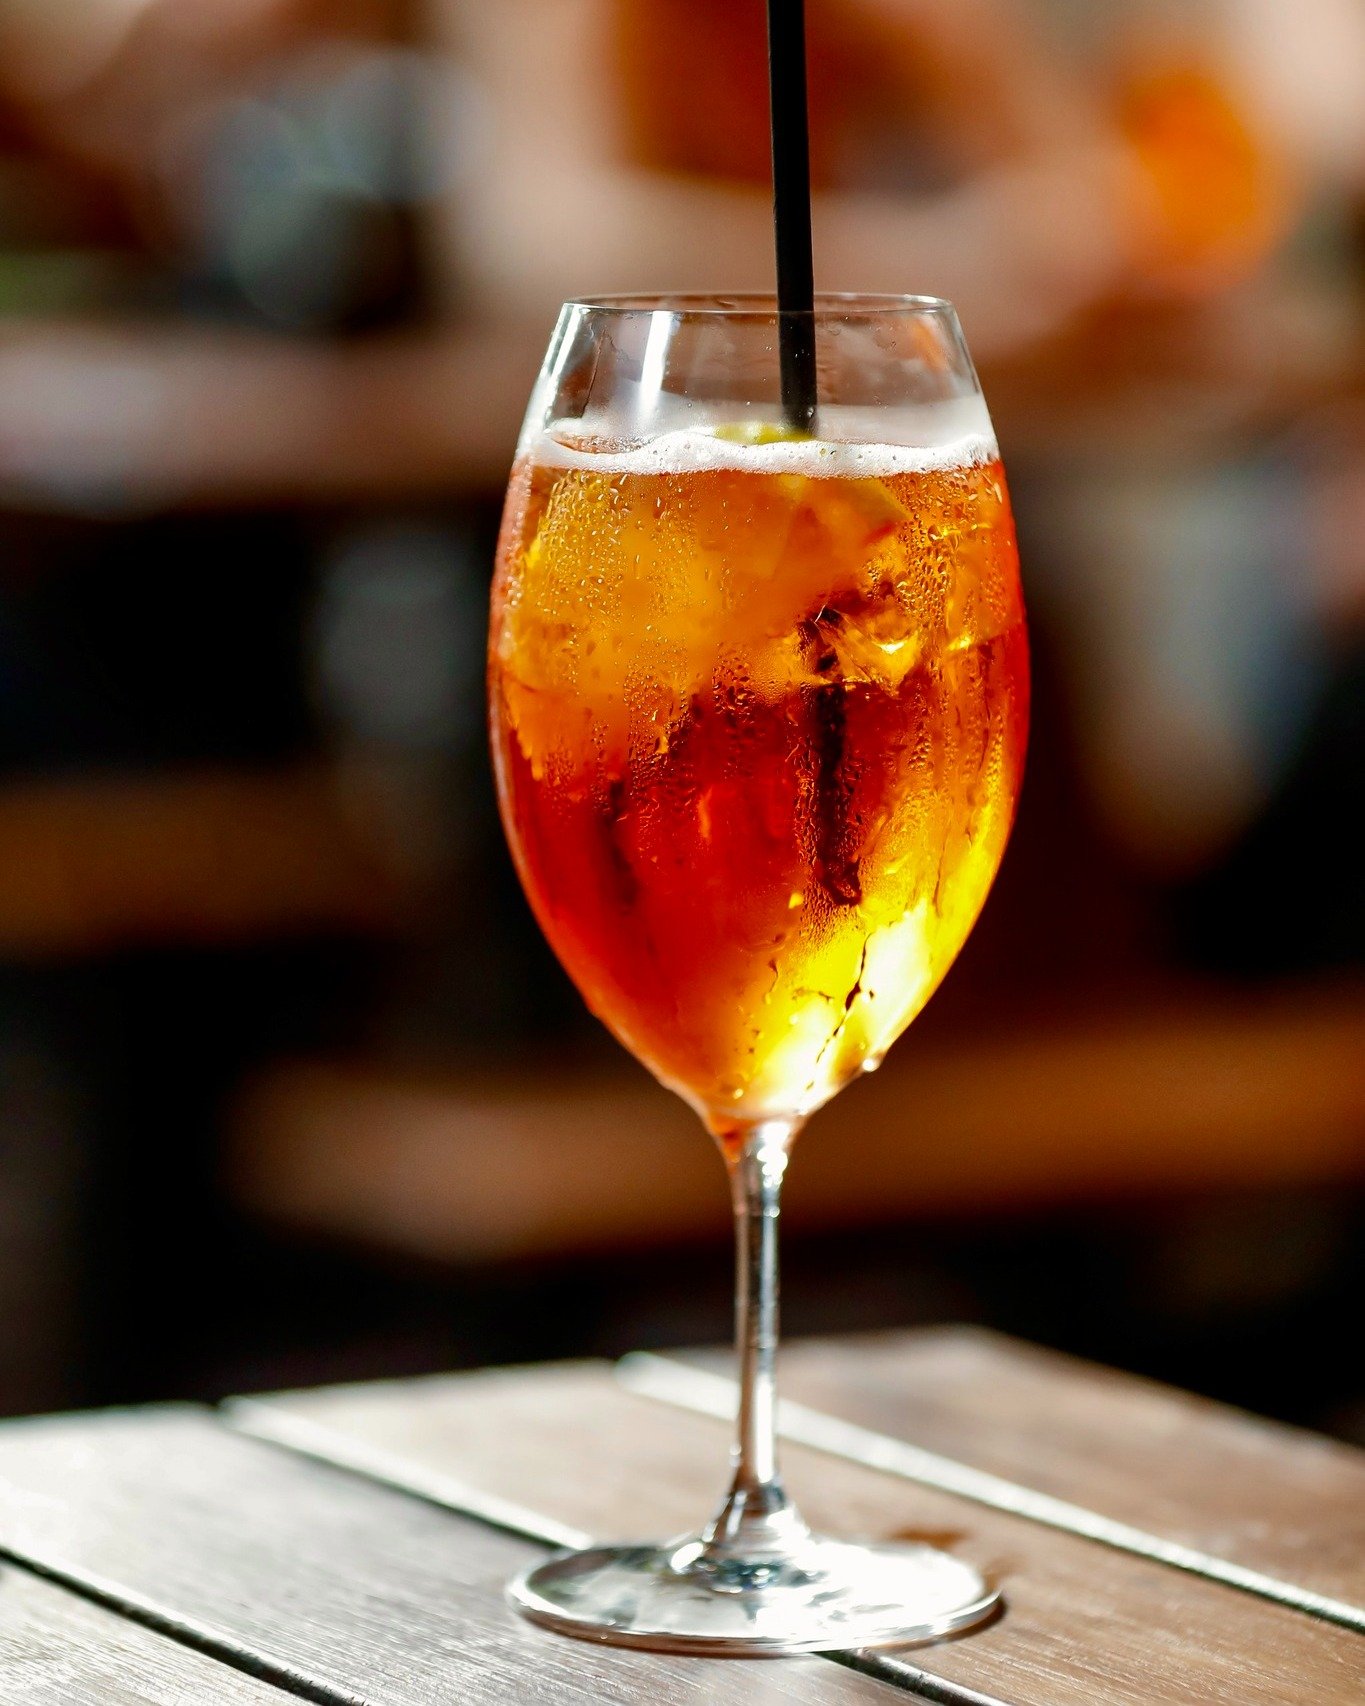 Congratulations, you made it to Friday! 

Celebrate with an Aperol spritz in our courtyard - they're only $14 during our daily Happy Hour from 3-6pm!
.
.
.
.
.
#royalsaxon #melbournepub #melbournepubs #melbourne #richmond3121 #richmondlife #thehappie